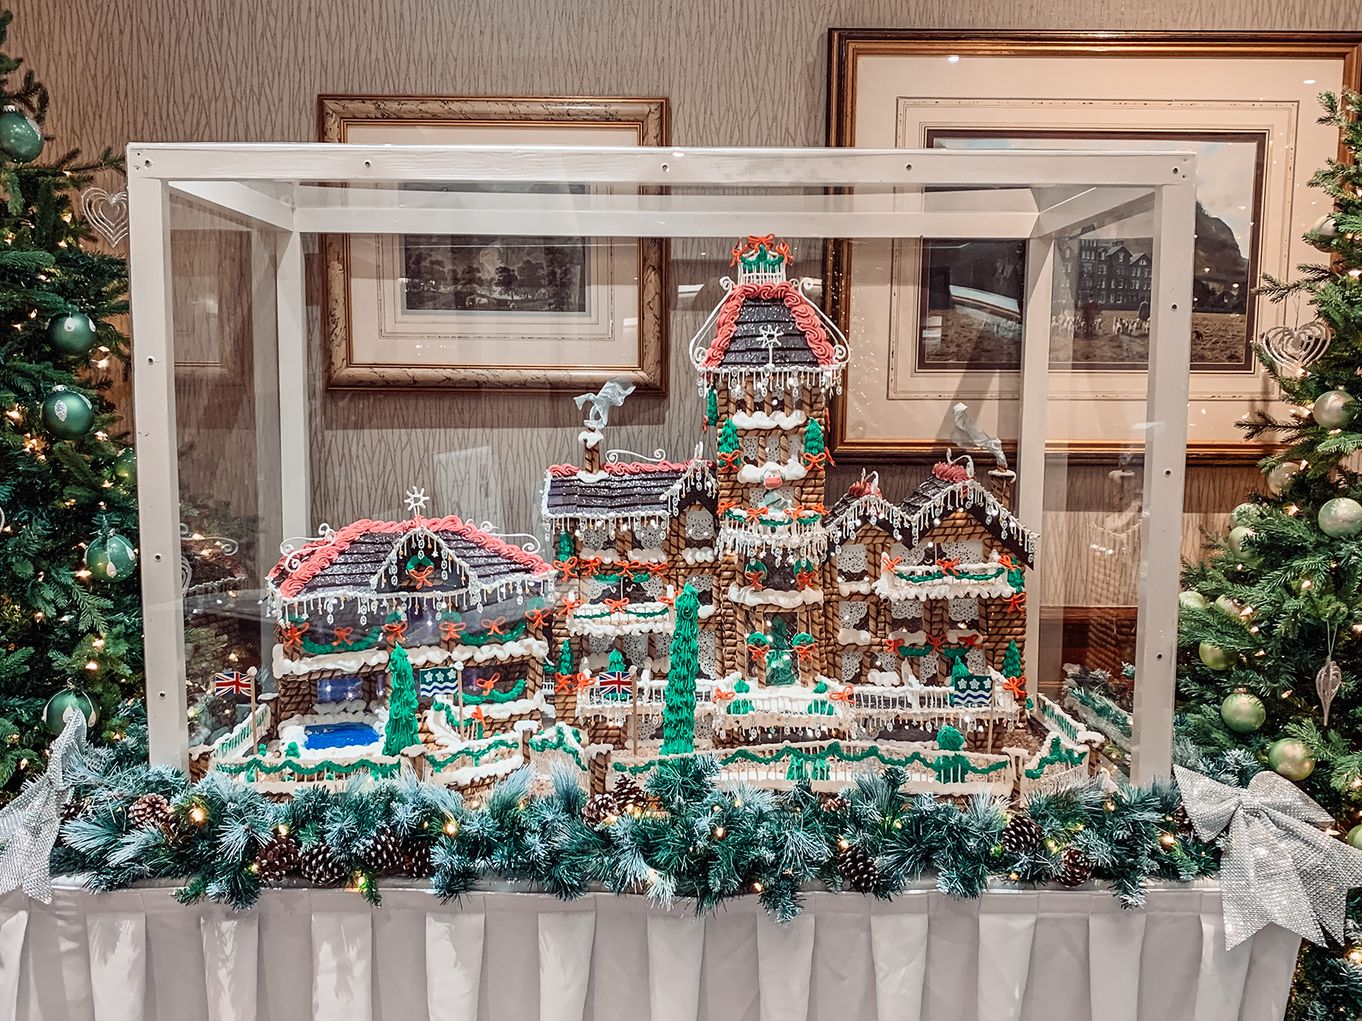 Lodore Hotel created from gingerbread